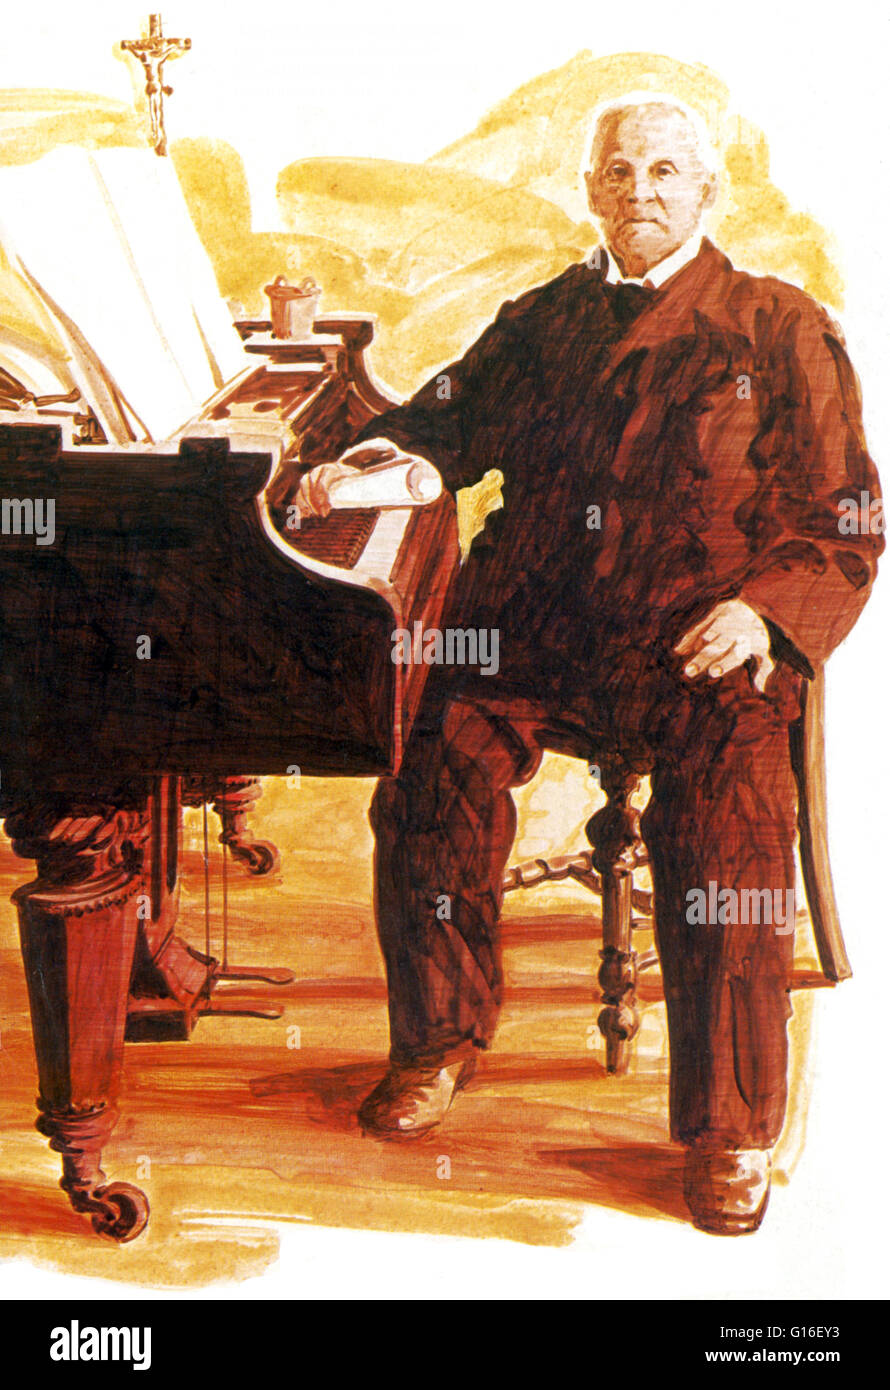 Bruckner at his piano in 1894, two years before his death. Anton Bruckner (September 4, 1824 - October 11, 1896) was an Austrian composer known for his symphonies, masses, and motets. The first are considered emblematic of the final stage of Austro-German Stock Photo